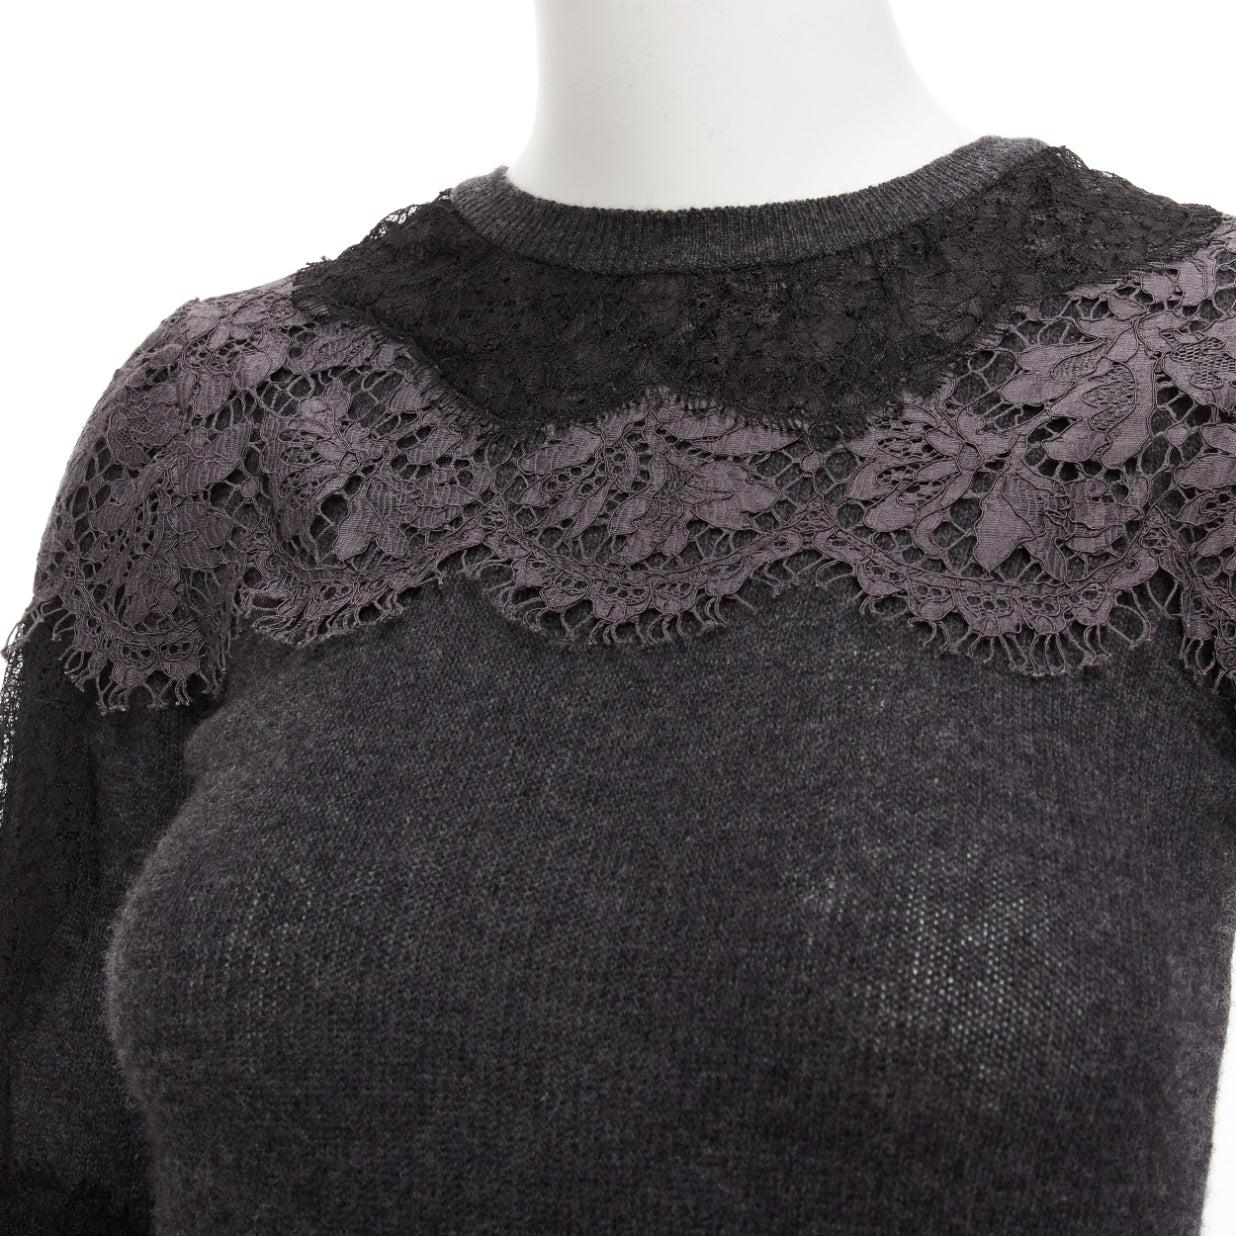 VALENTINO grey black lace virgin wool cashmere crew neck sweater XS
Reference: AAWC/A01097
Brand: Valentino
Designer: Pier Paolo Piccioli
Material: Virgin Wool, Cashmere
Color: Grey, Black
Pattern: Lace
Closure: Zip
Extra Details: Back half zip.